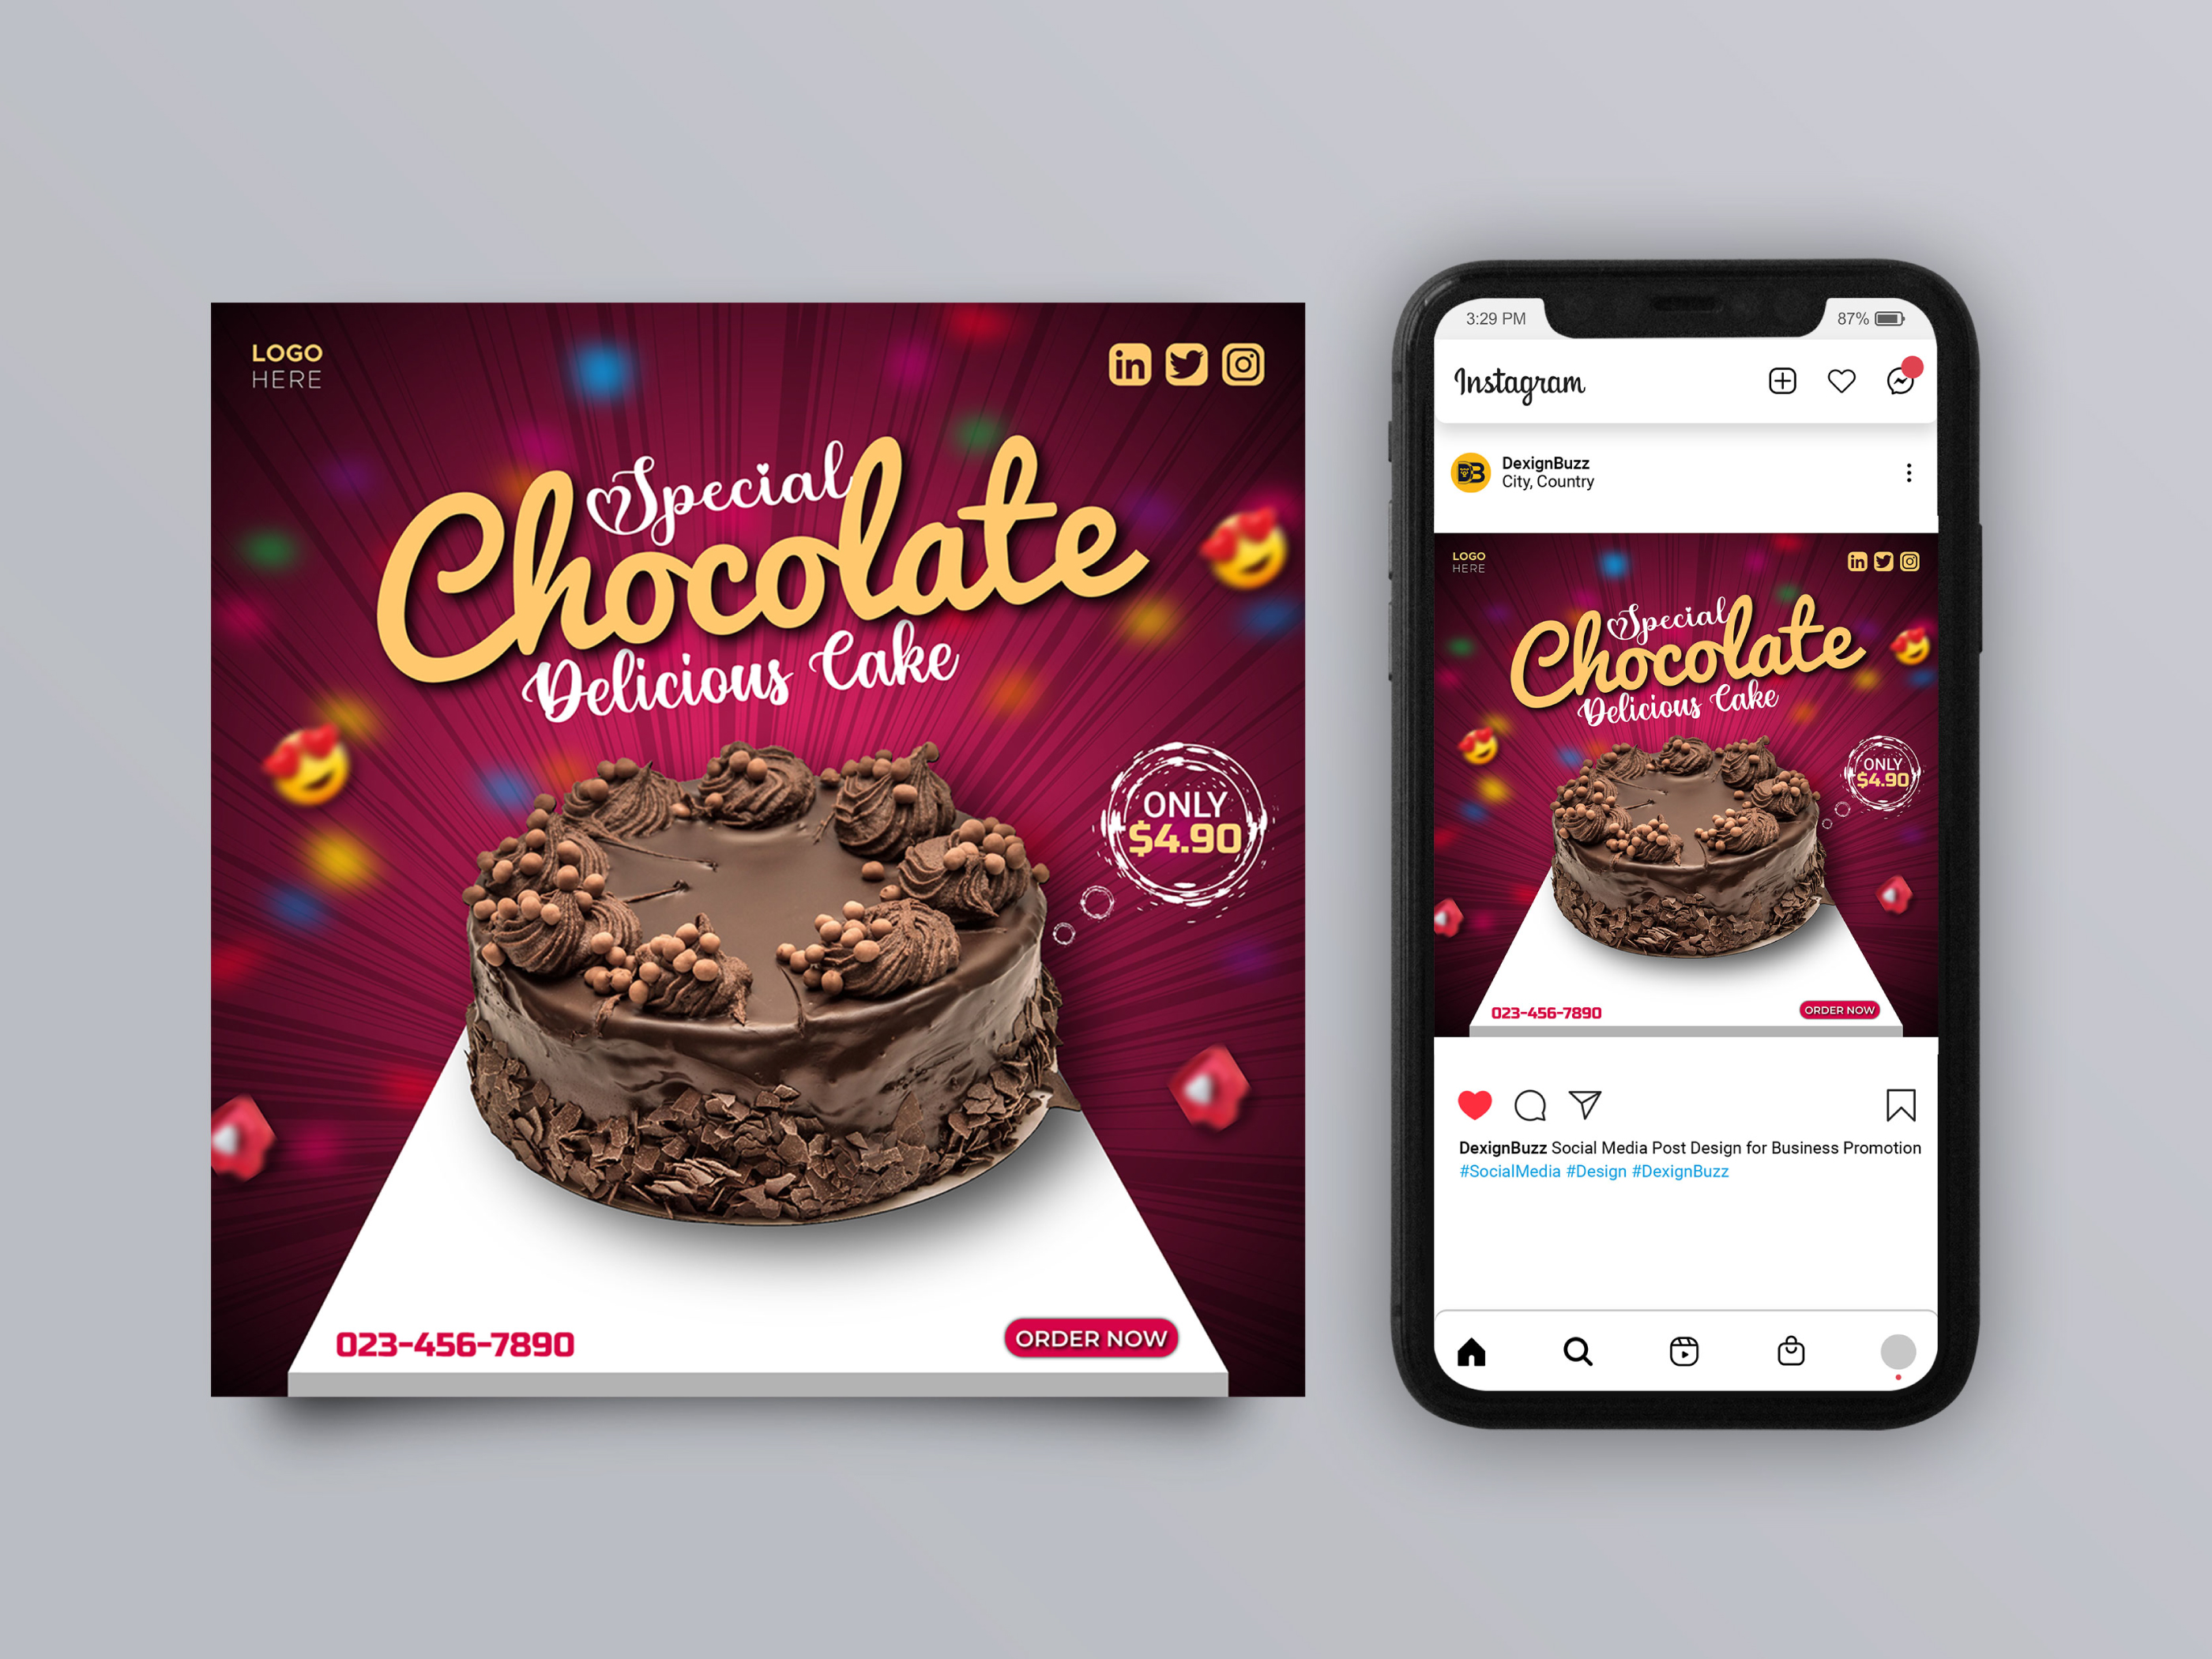 Free Dessert and Cake Shop Instagram Post Template PSD - PsFiles